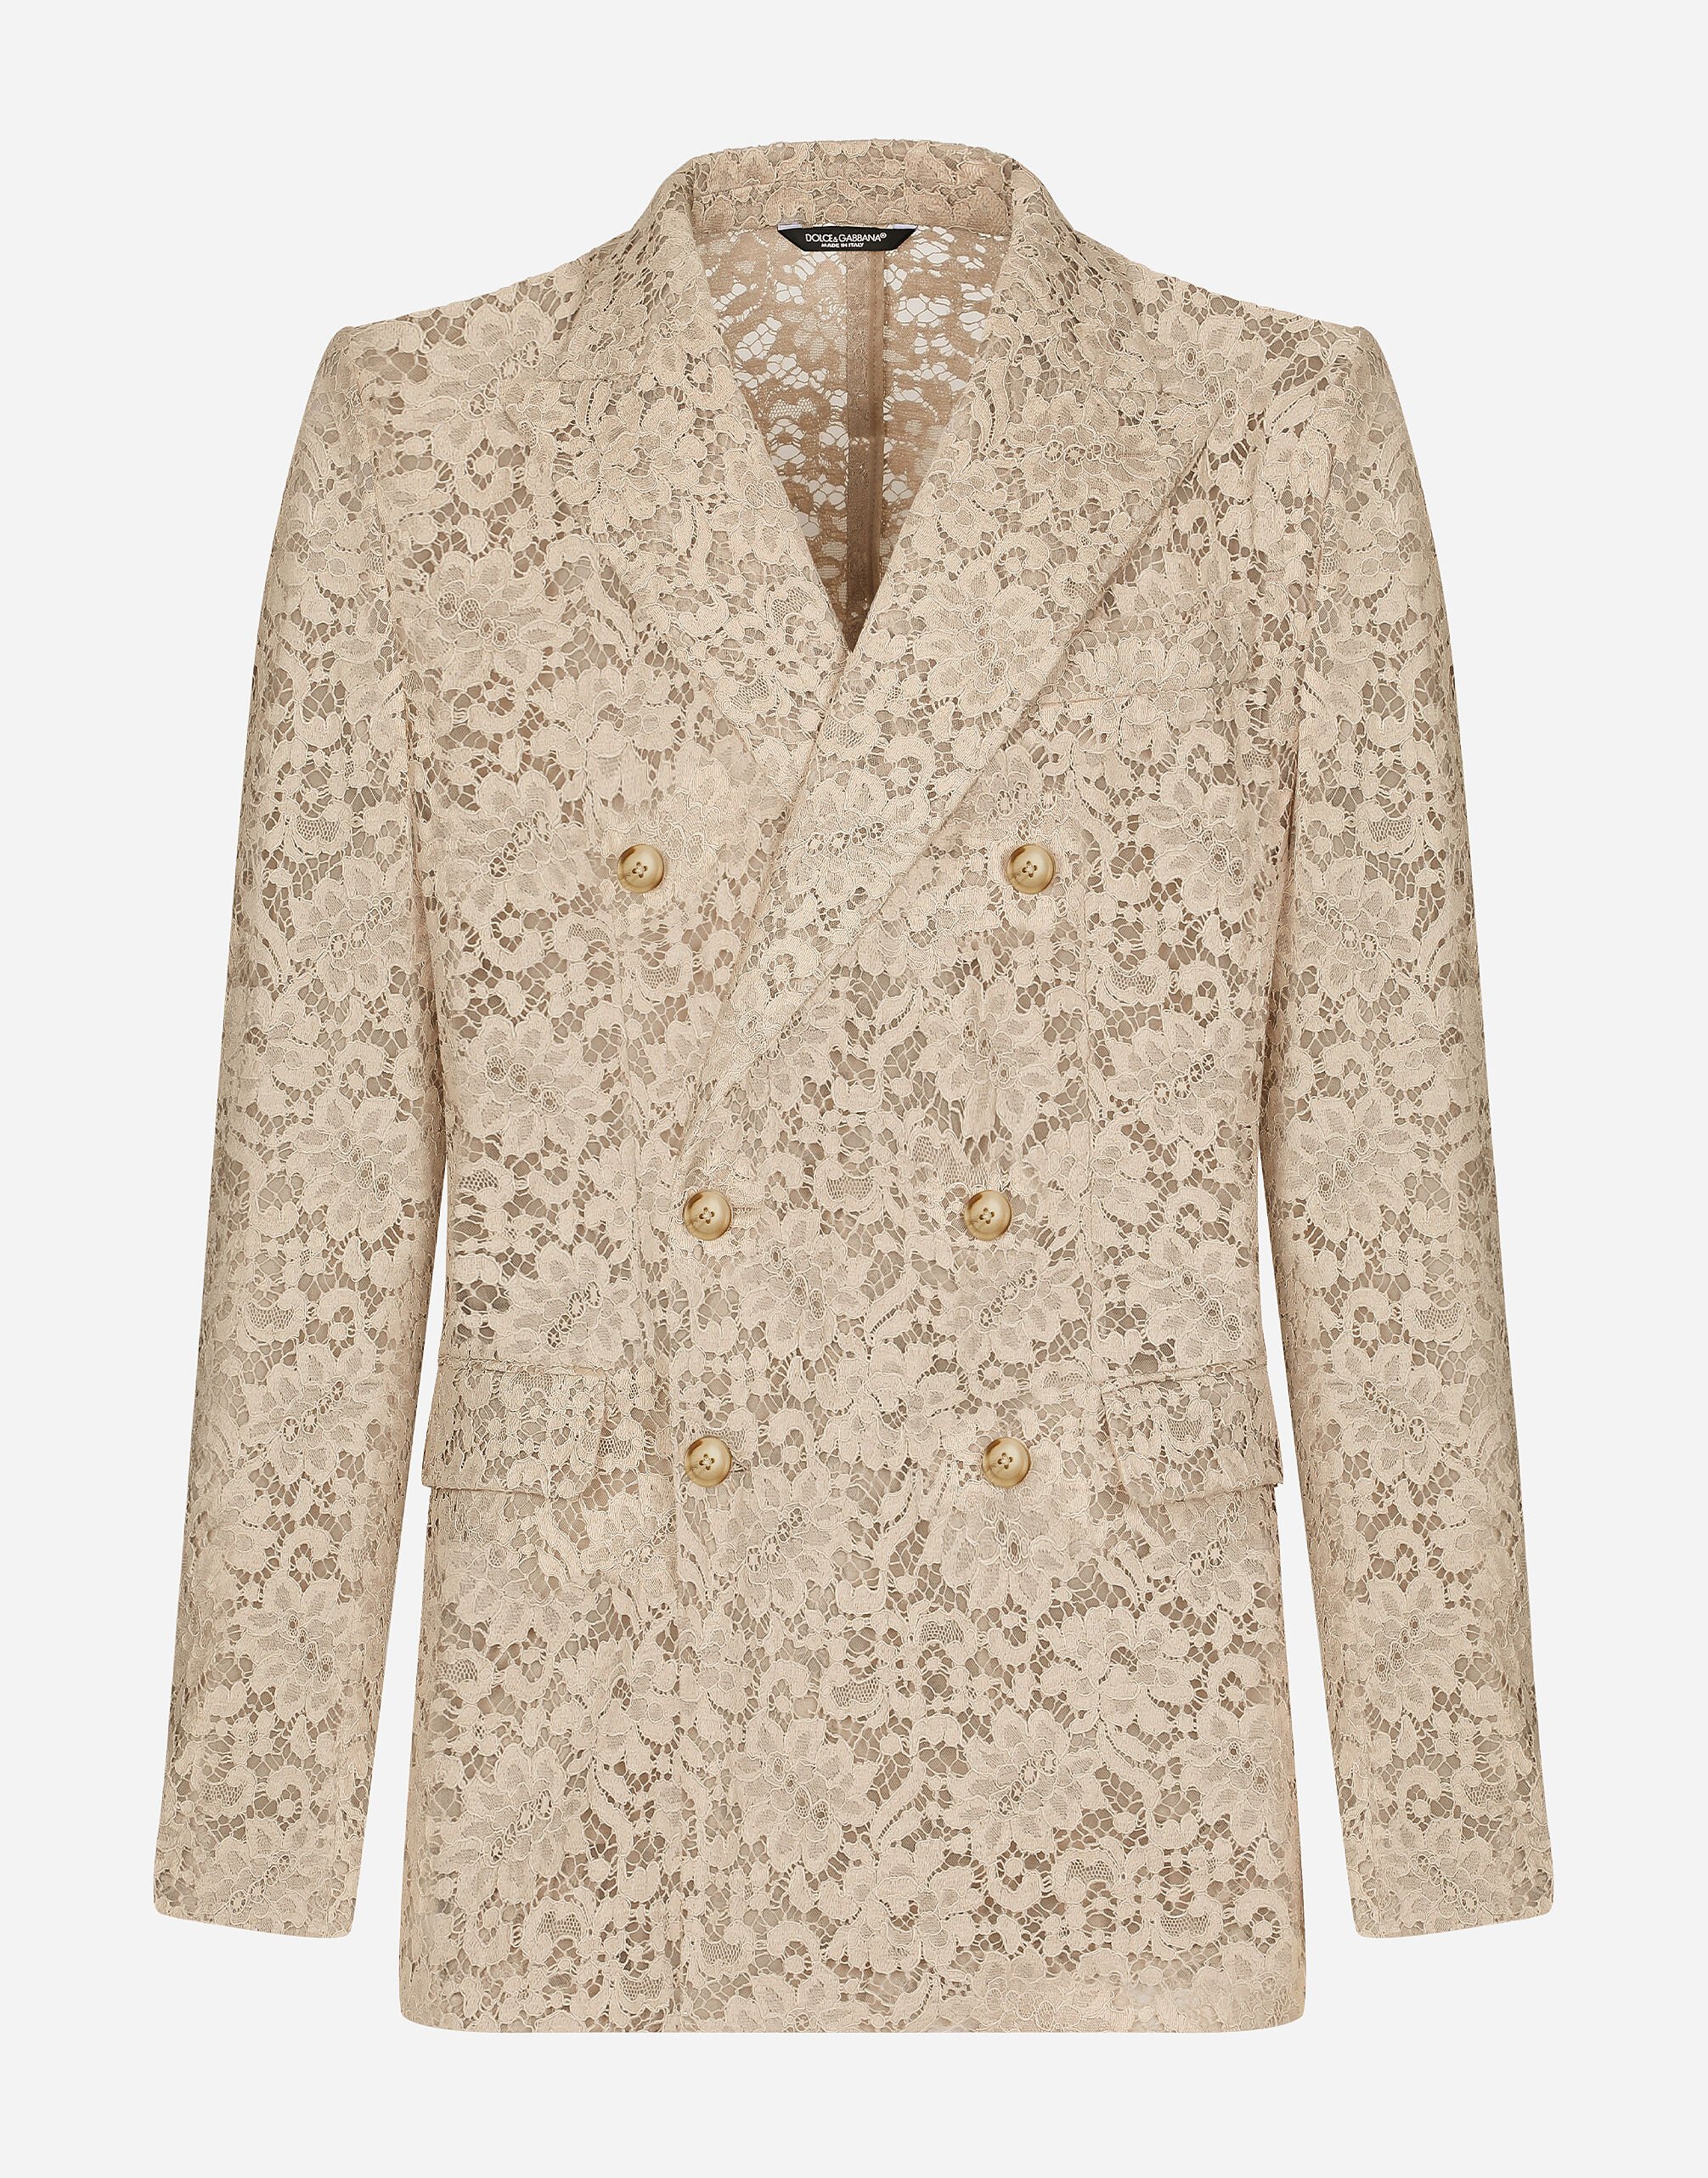 Dolce & Gabbana Double-breasted cordonetto lace jacket Beige G2SV7THLMGE